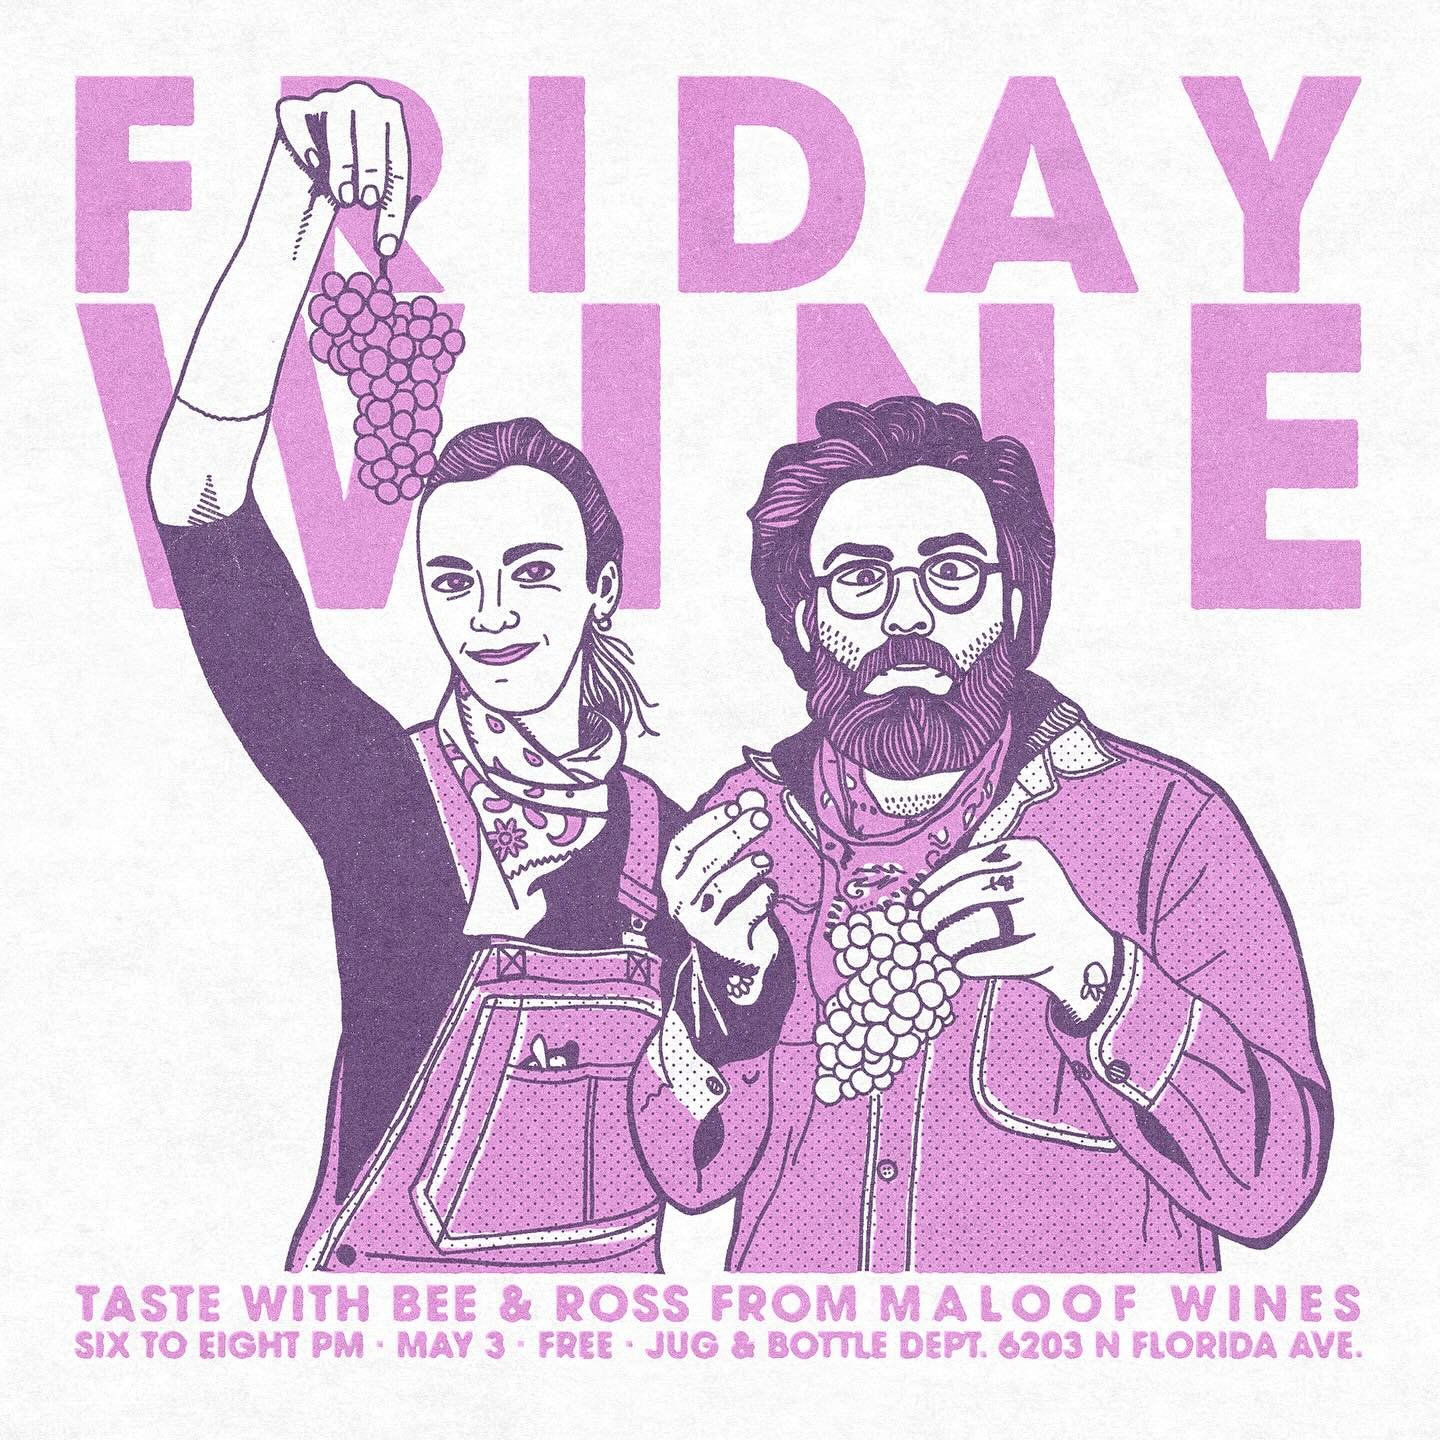 This #fridaywine promises to be a special treat. We&rsquo;ve got Ross &amp; Bee Maloof, the vintners behind @maloofwines in the Jug for the evening.

We&rsquo;ll have their current vintages up for taste and sale. So stop on by and get ya a taste. 

a